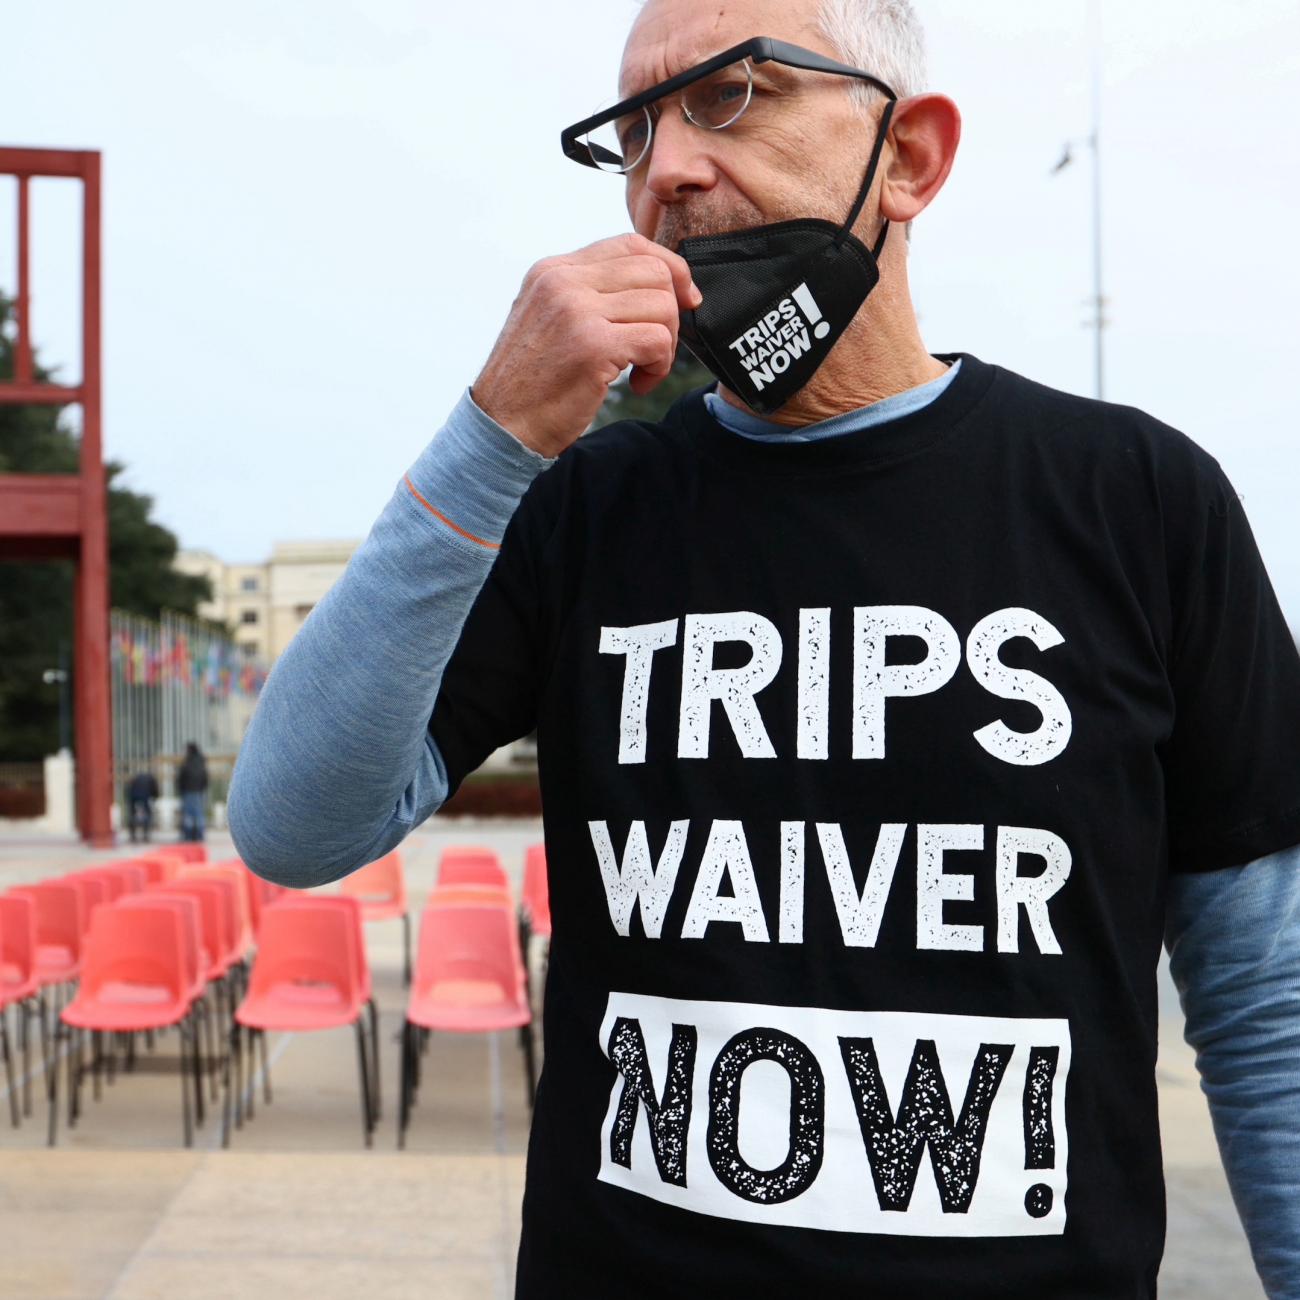 A man adjusts a face mask and is wearing a black shirt that reads "TRIPS WAIVER NOW!" He stands in front of rows of empty chairs.